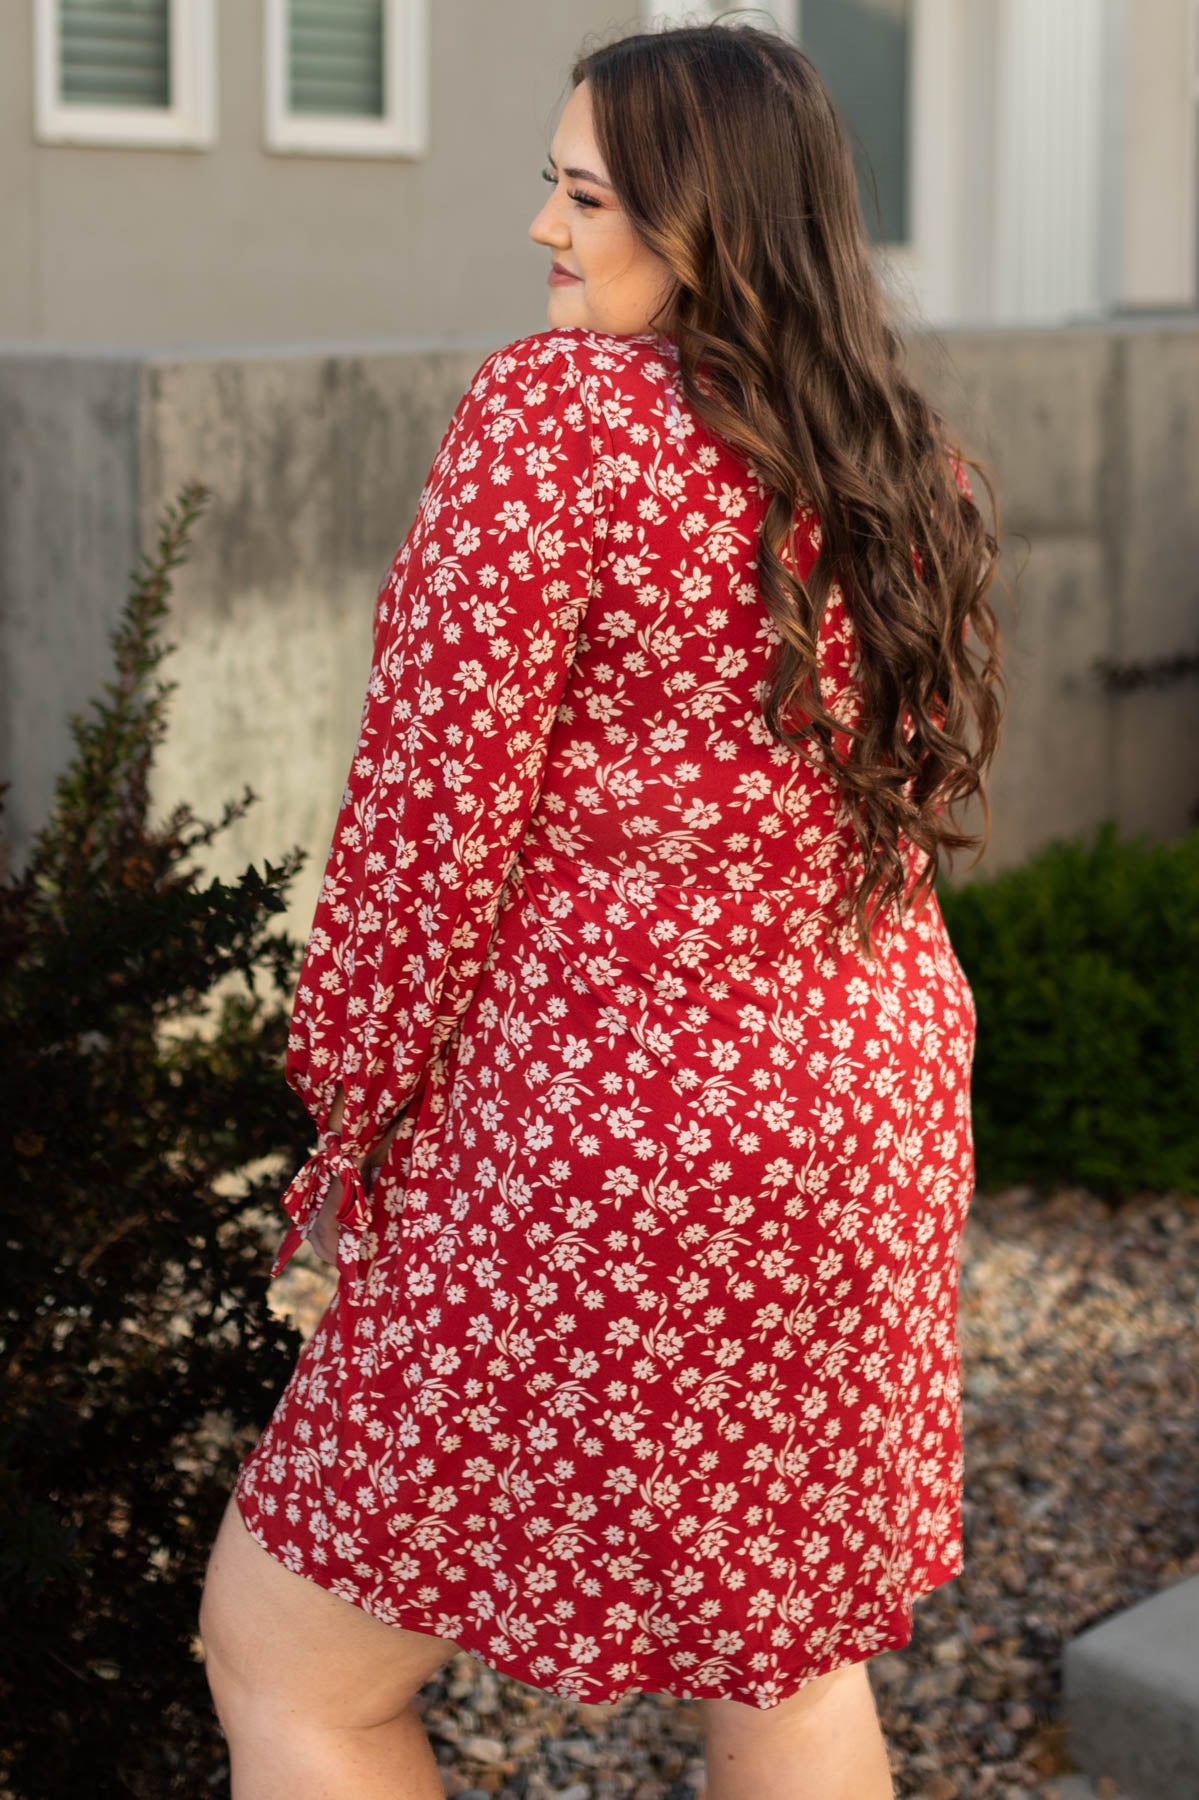 Side view of a red floral dress